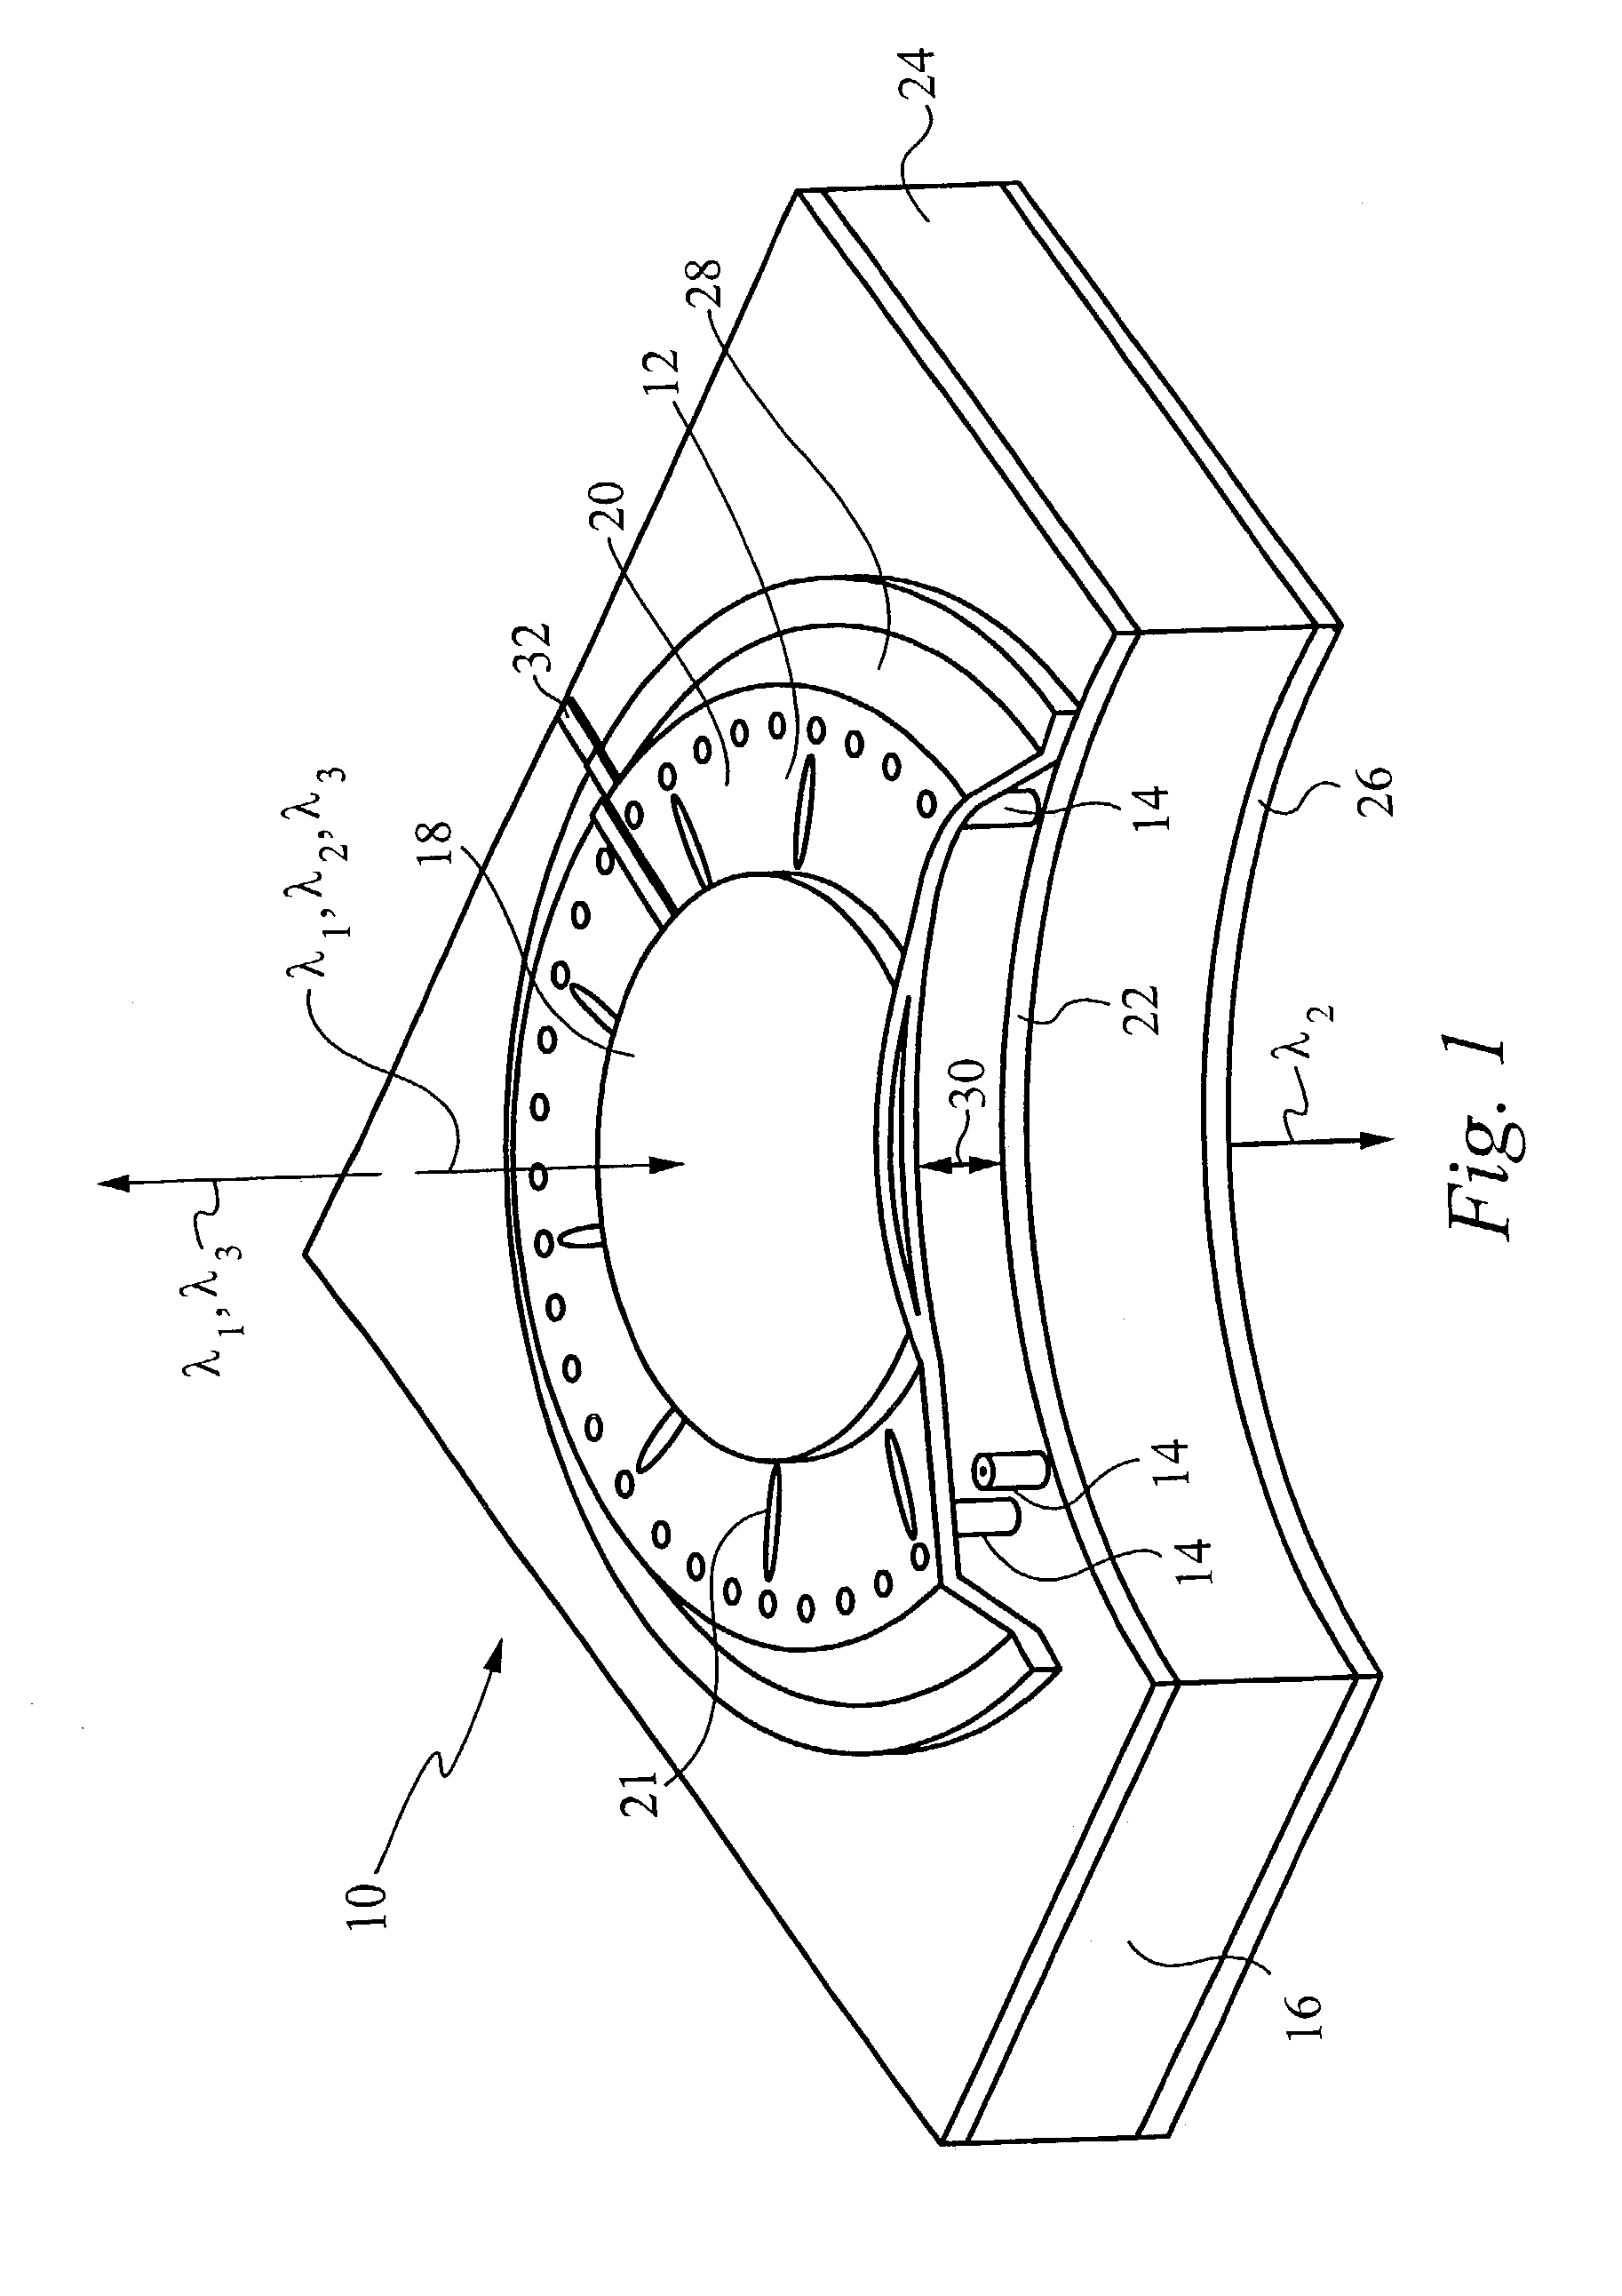 Fabry-Perot interferometer including membrane supported reflector